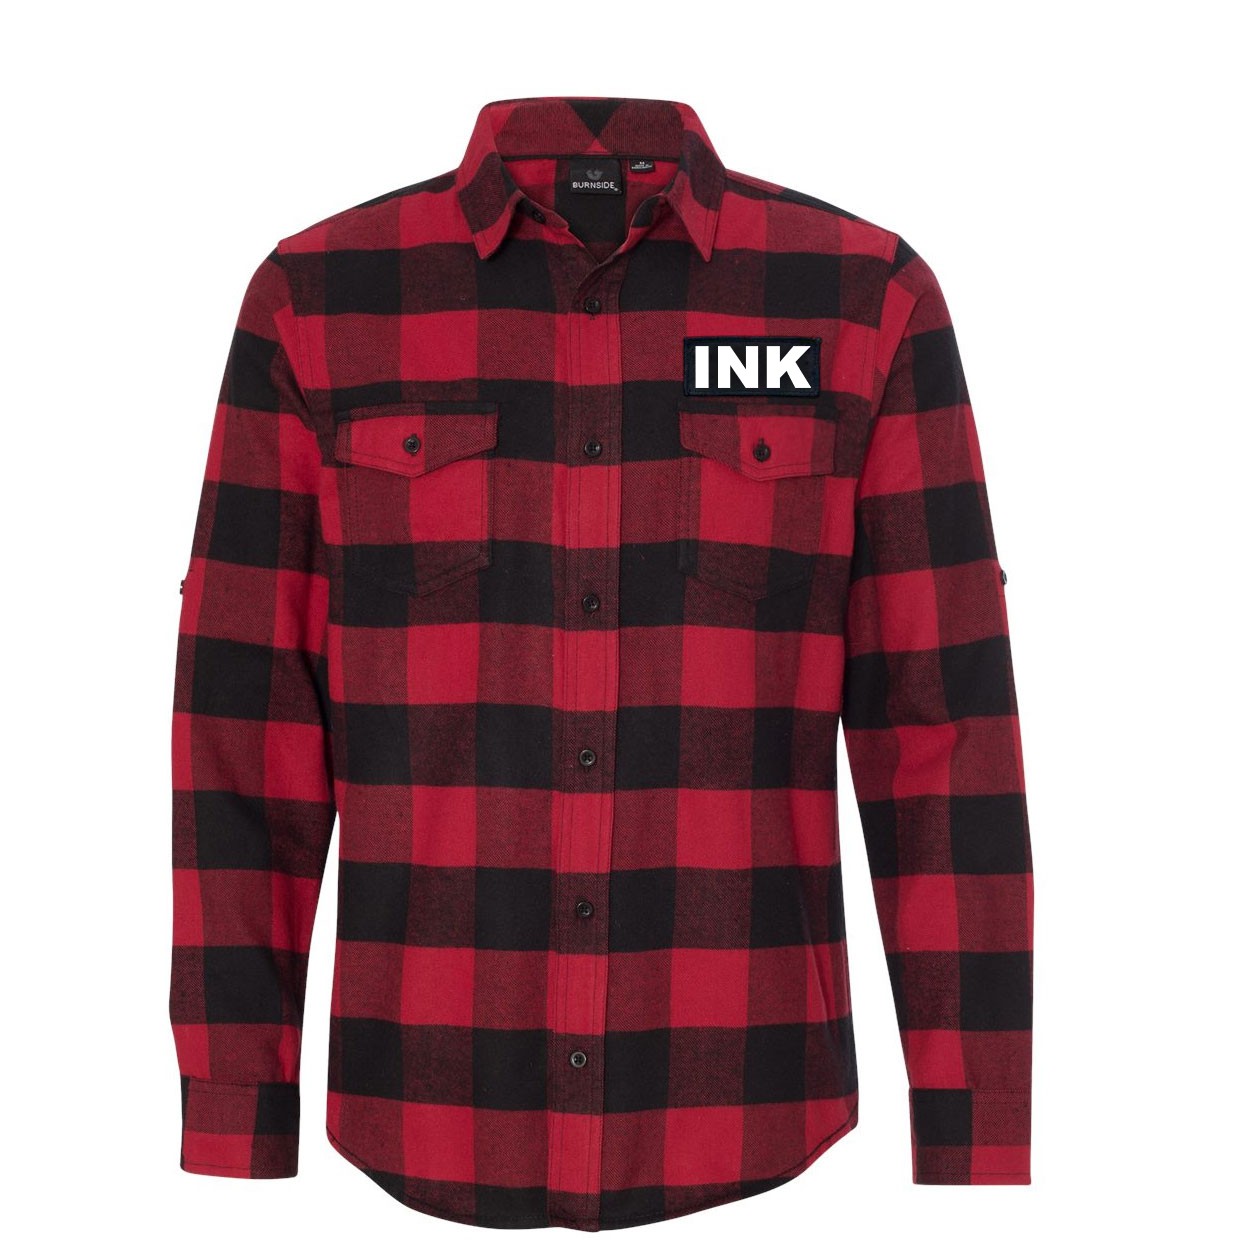 Ink Brand Logo Classic Unisex Long Sleeve Woven Patch Flannel Shirt Red/Black Buffalo (White Logo)